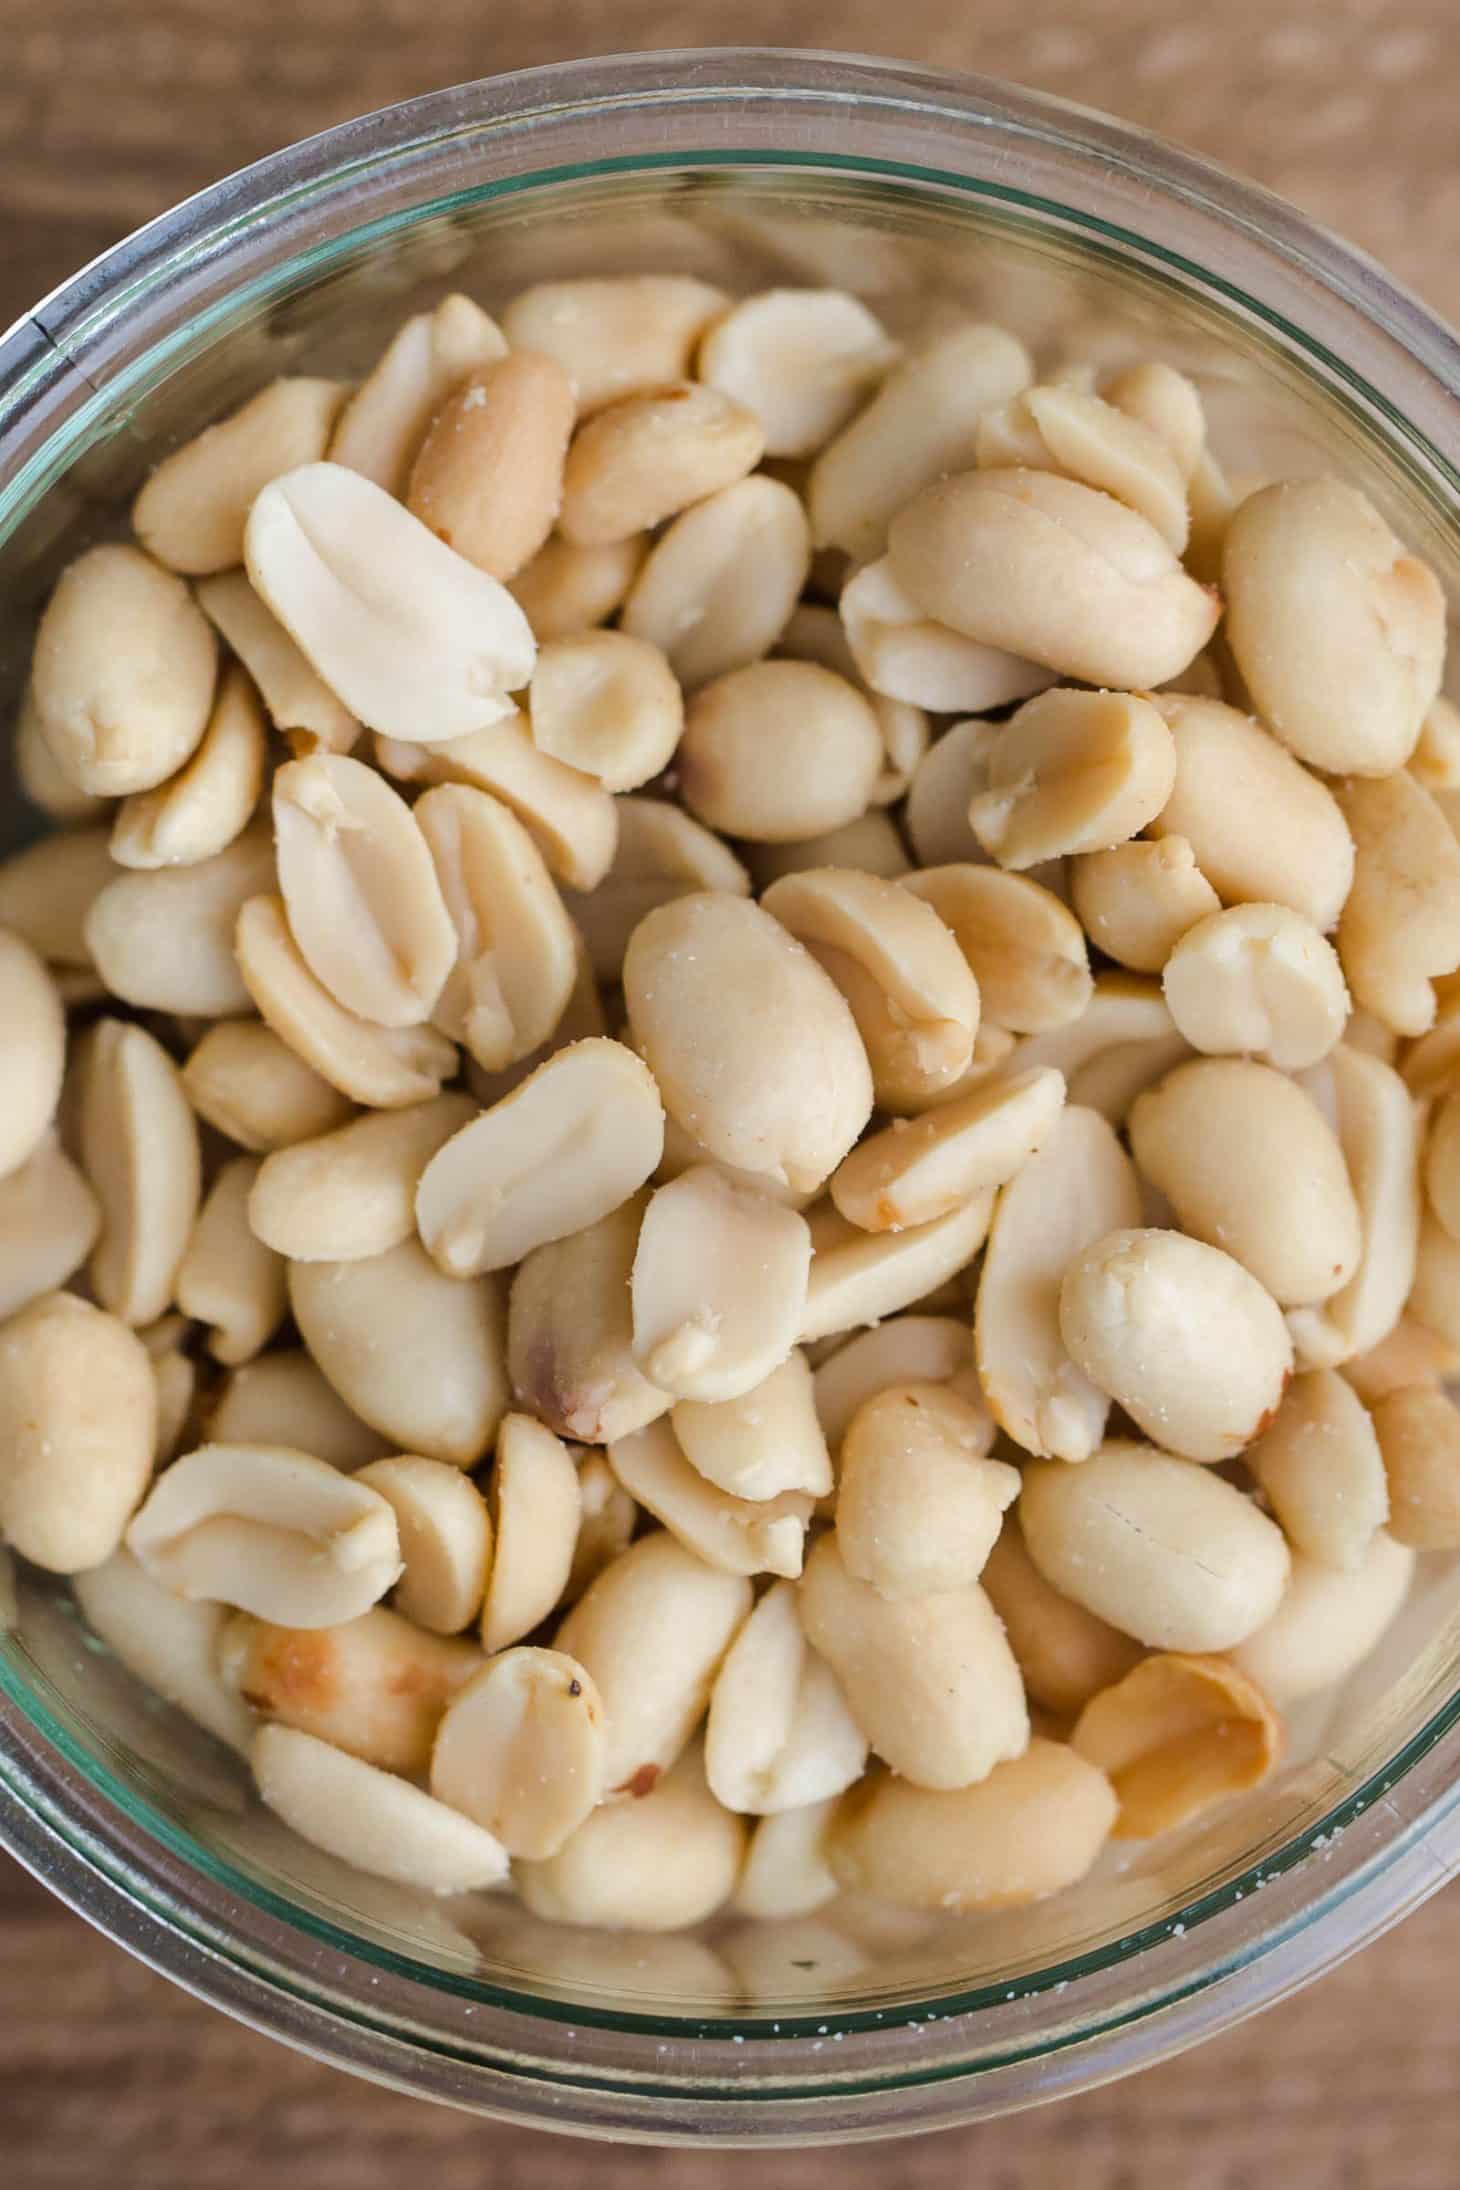 Peanuts - Nuts and Seeds - Stock a Pantry